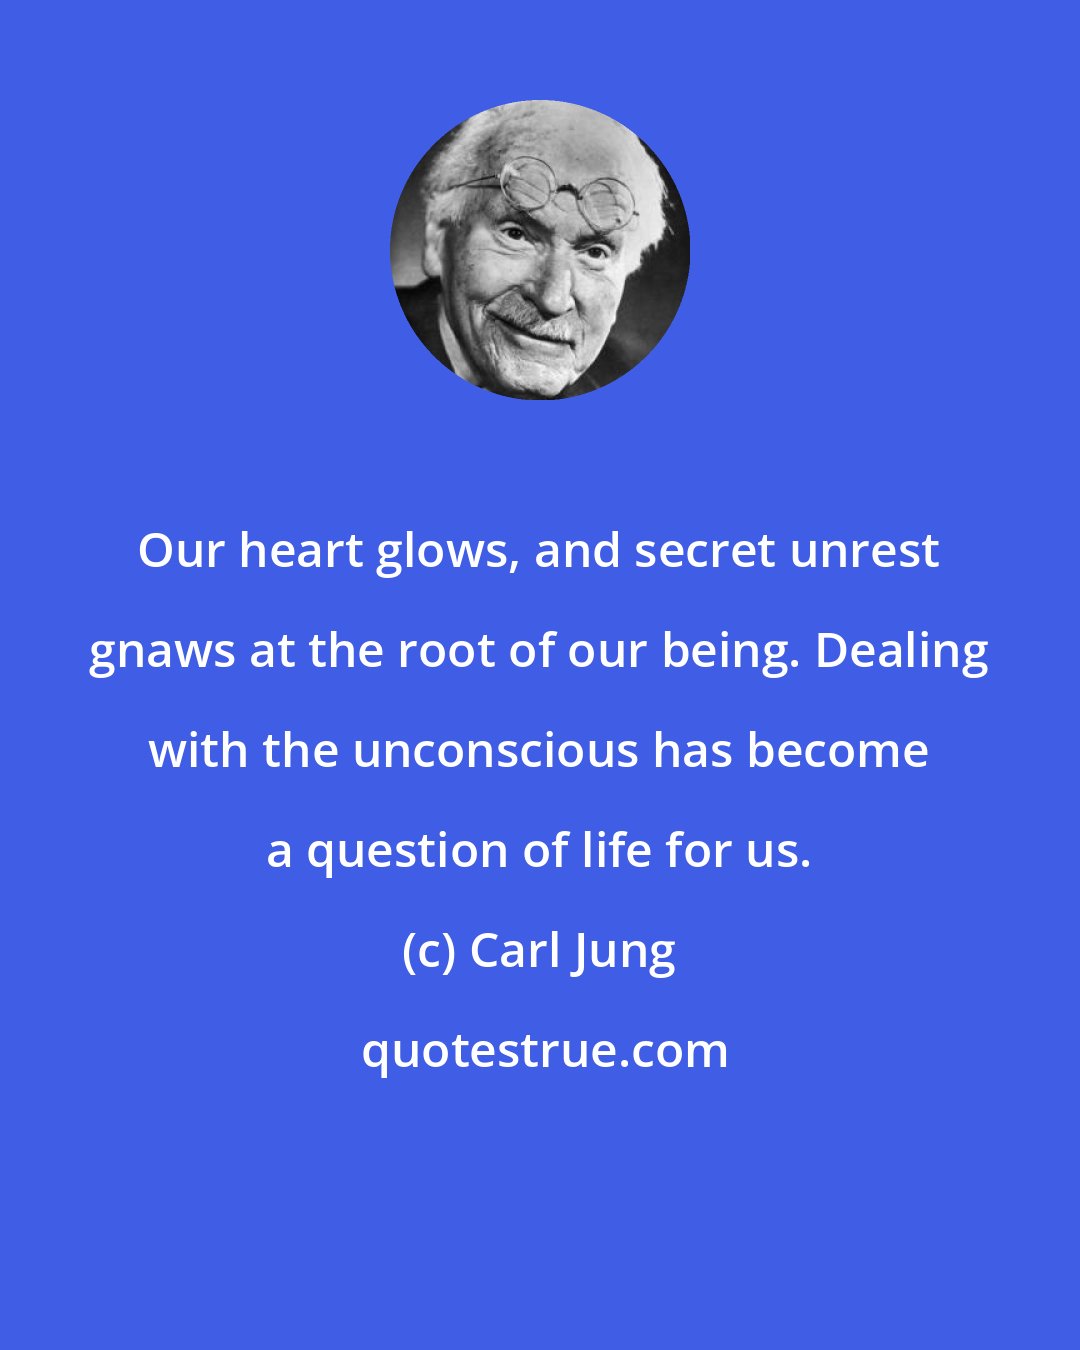 Carl Jung: Our heart glows, and secret unrest gnaws at the root of our being. Dealing with the unconscious has become a question of life for us.